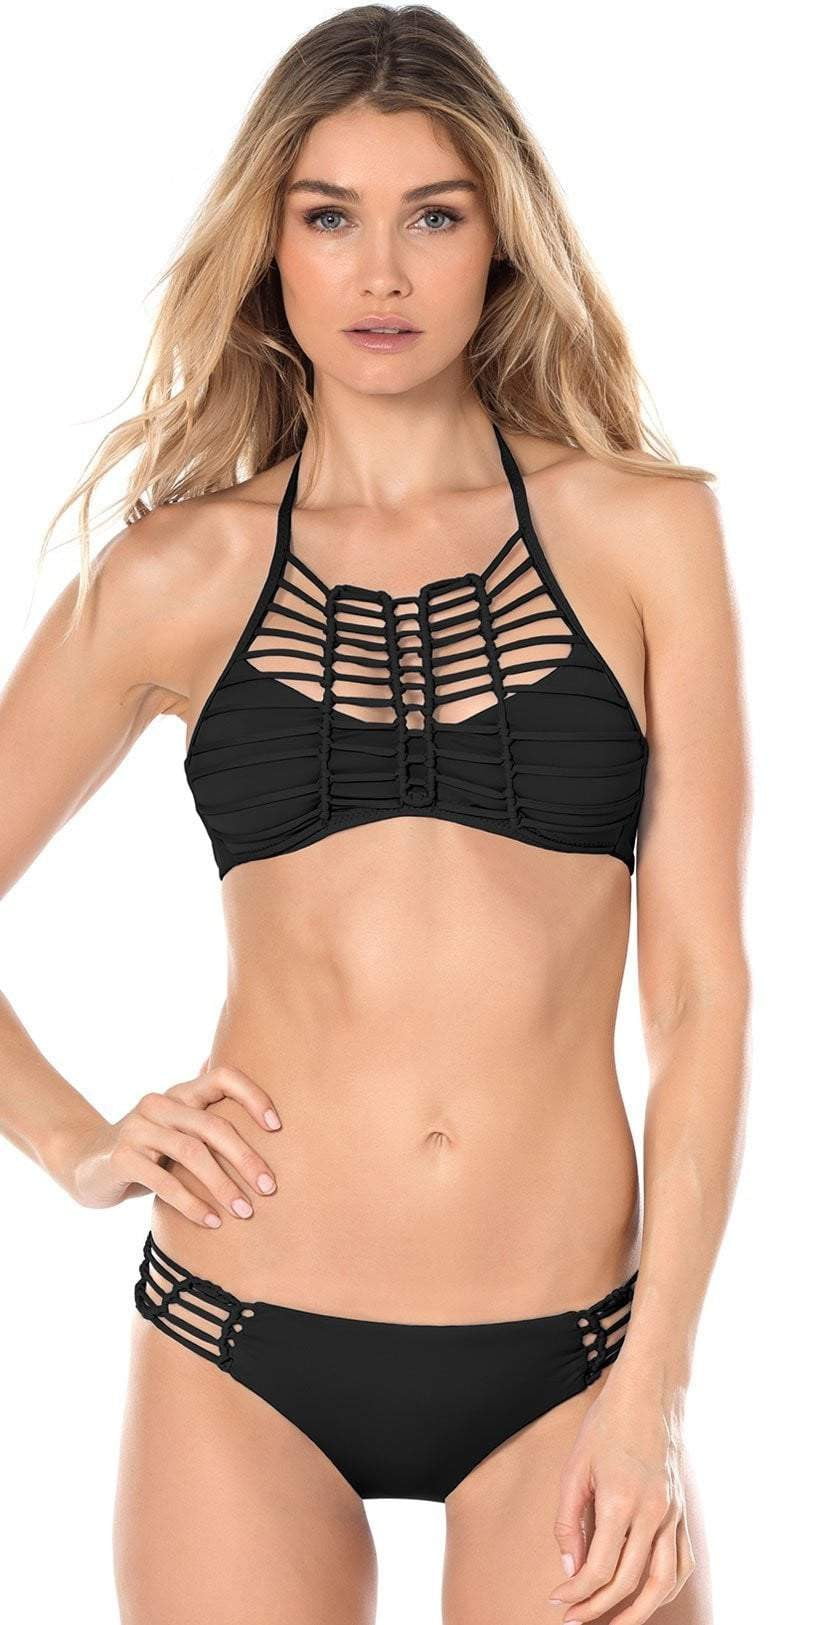 Becca No Strings Attached High Neck Top In Black 859587-BLK: